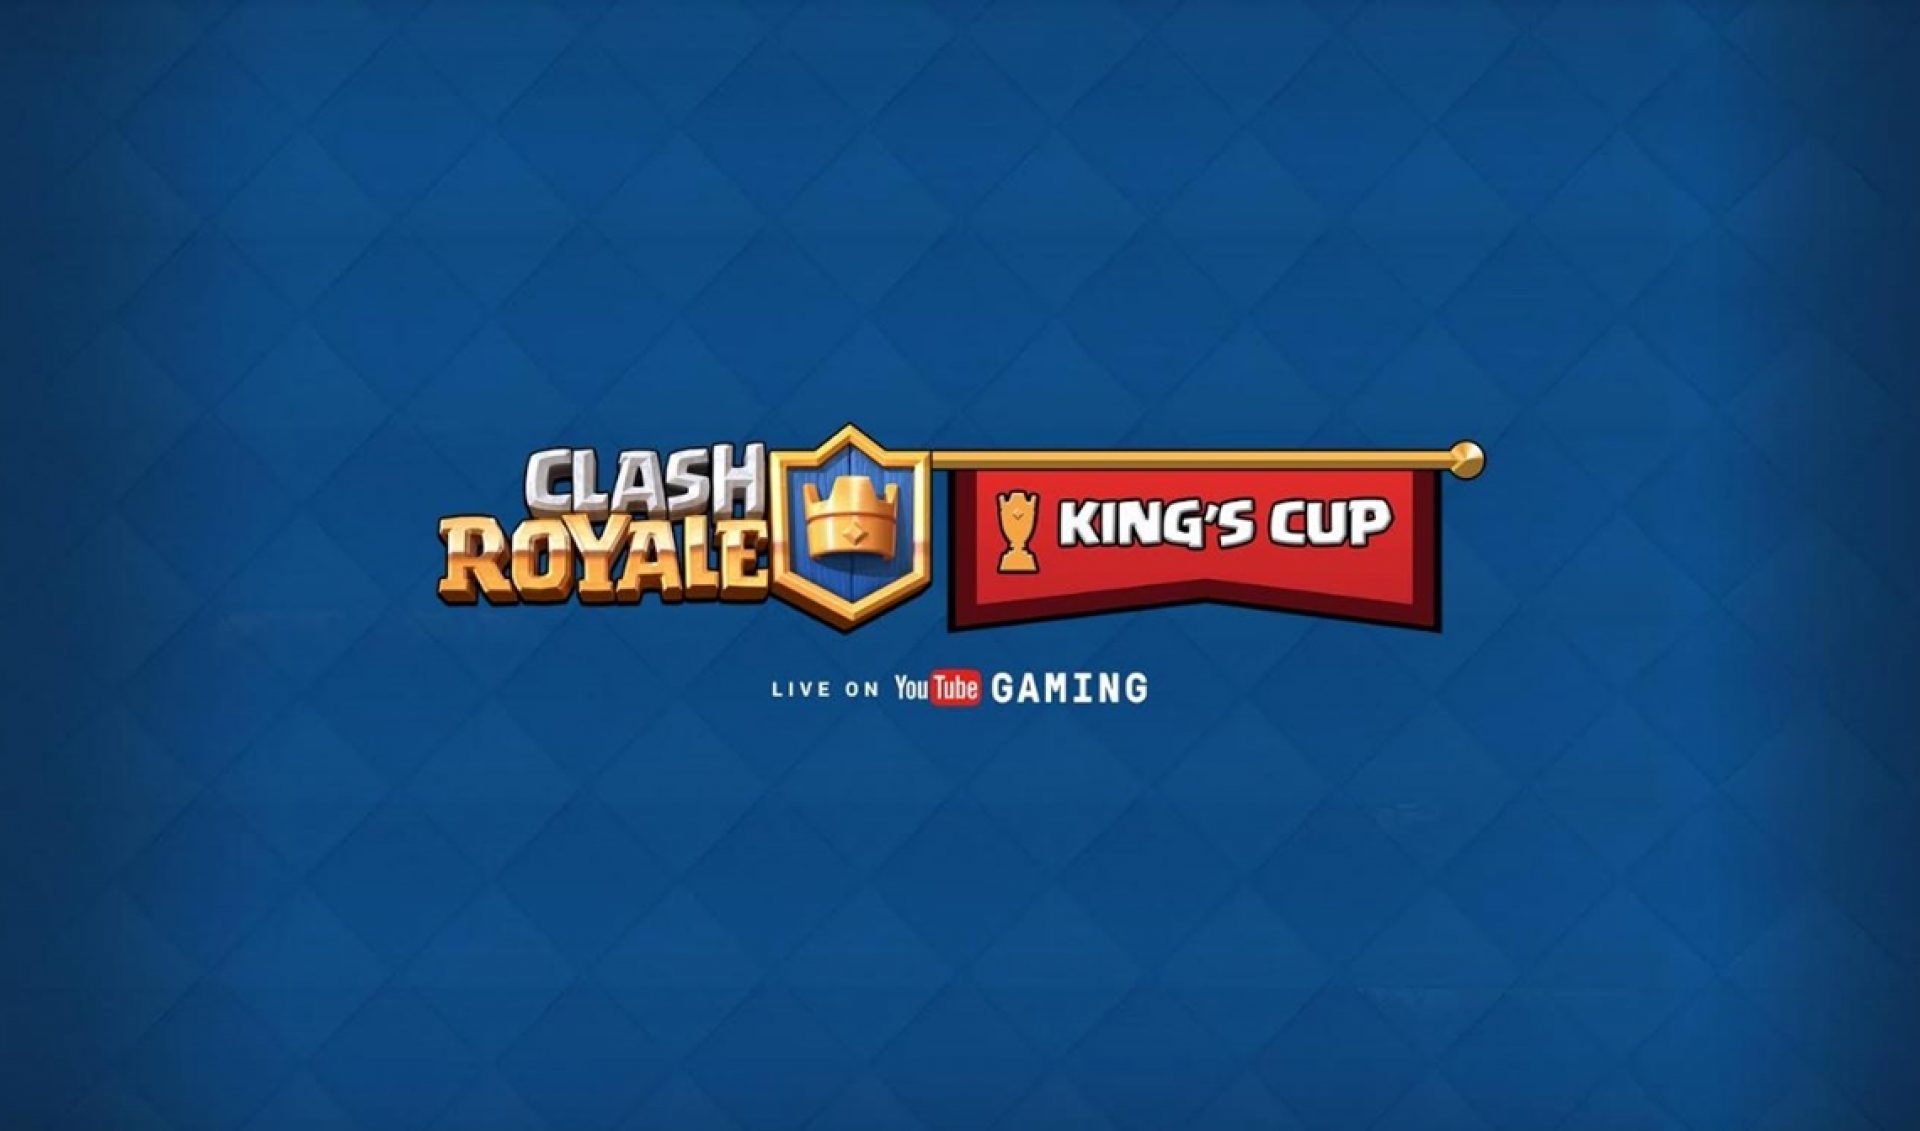 YouTube Gaming To Host Clash Royale Tournament Touting $100,000 Prize Pool